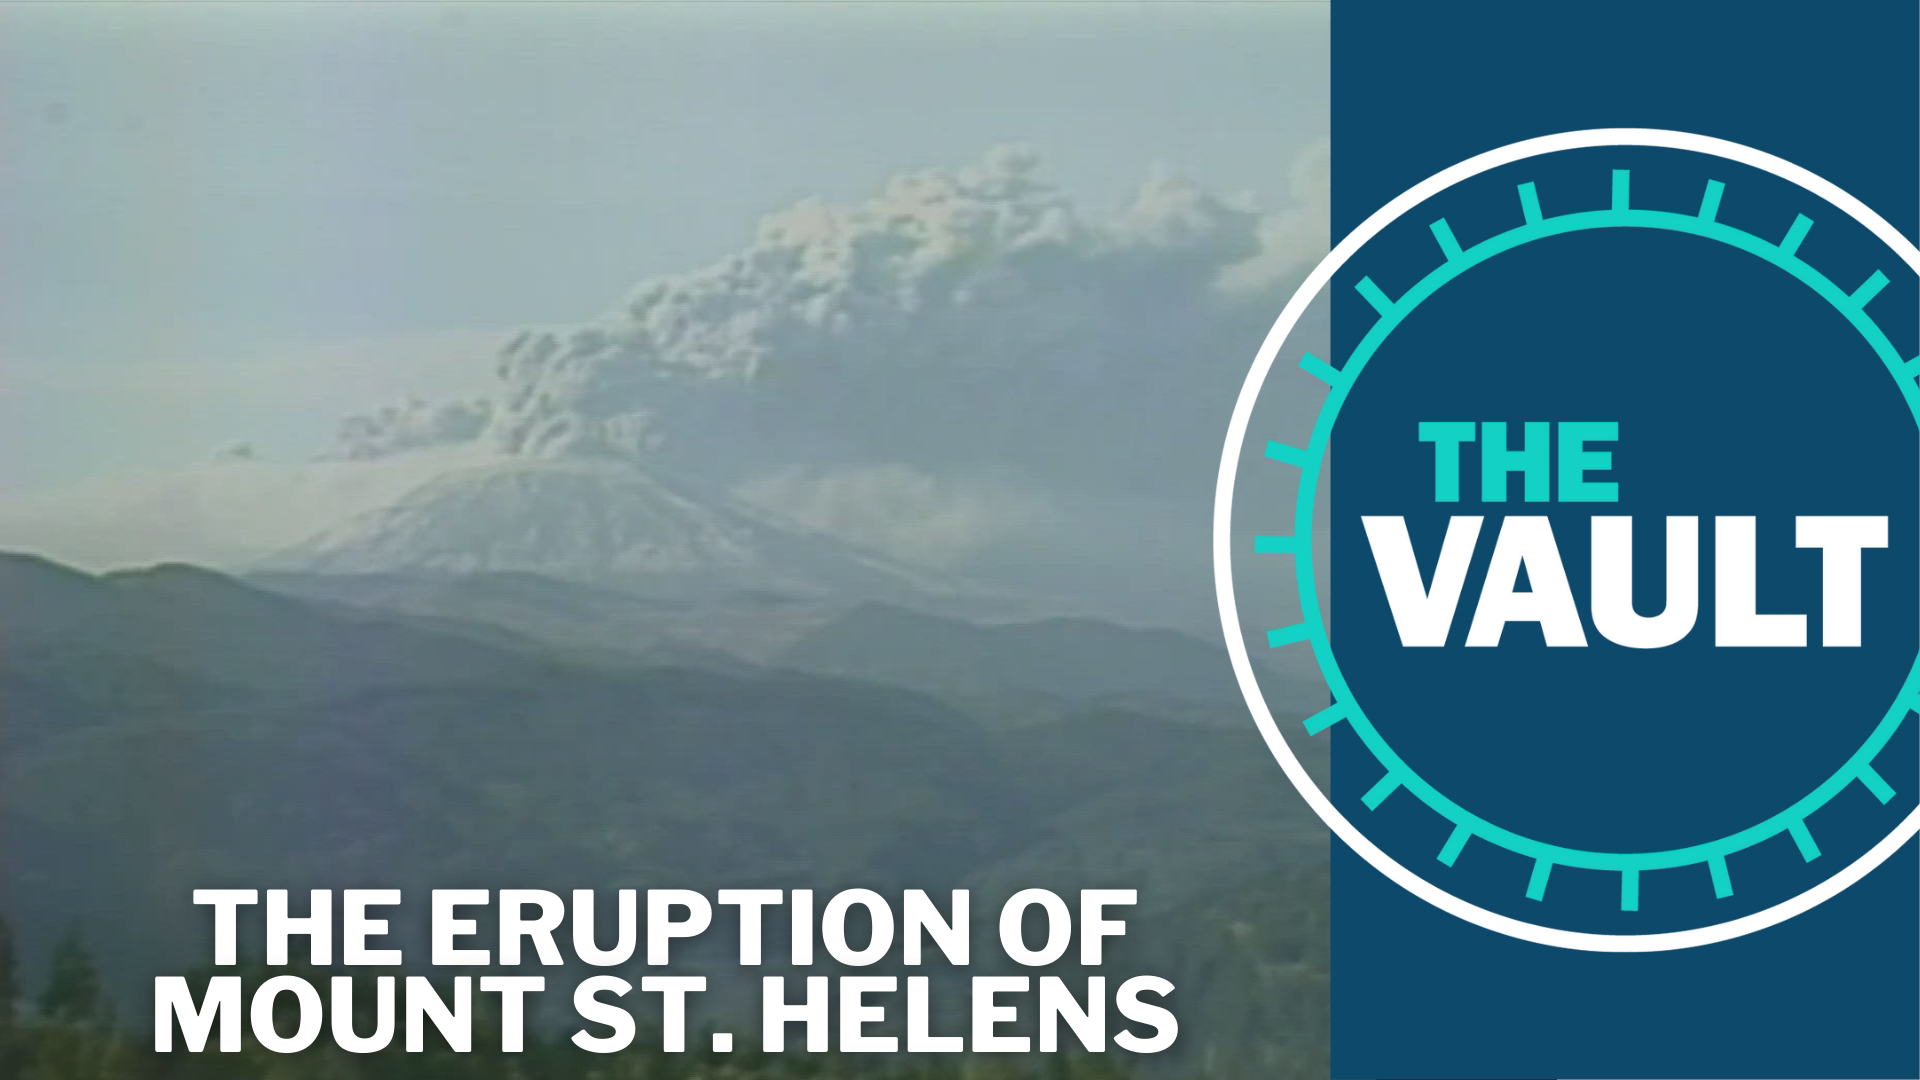 We look back to archive footage from the day that Mount St. Helens in southwest Washington erupted — May 18, 1980.